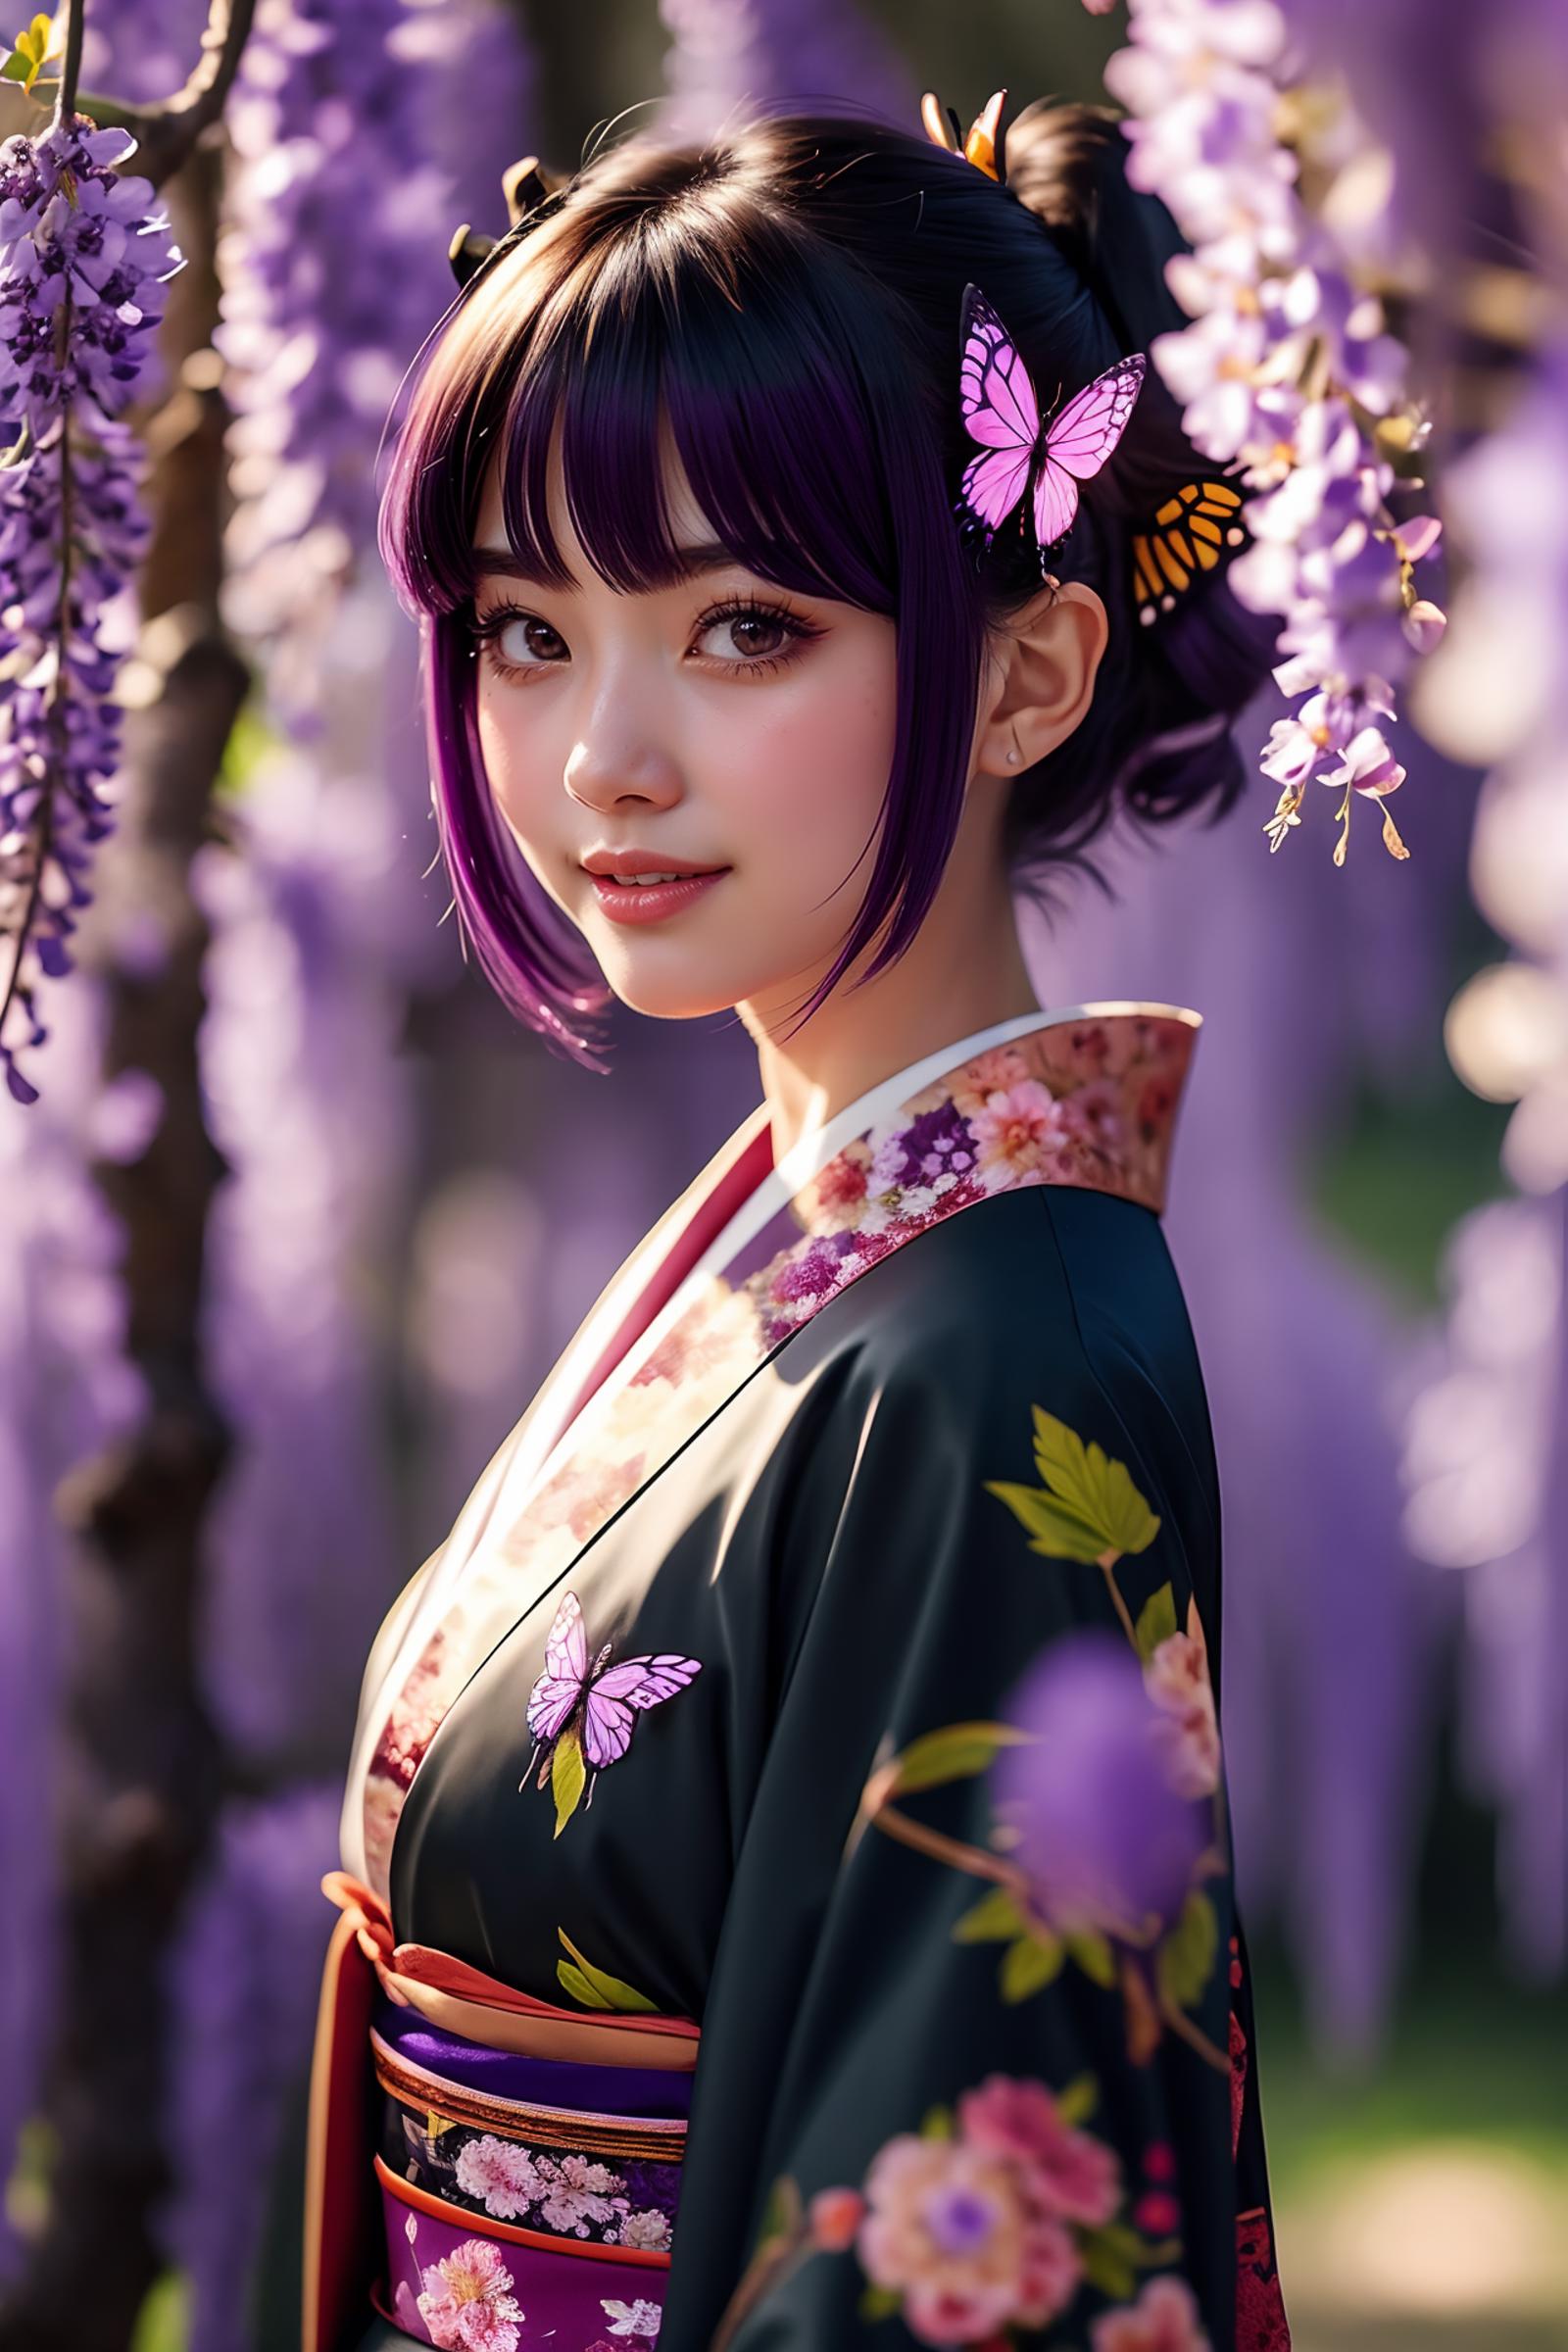 A young girl with purple hair wearing a kimono with butterflies on it.